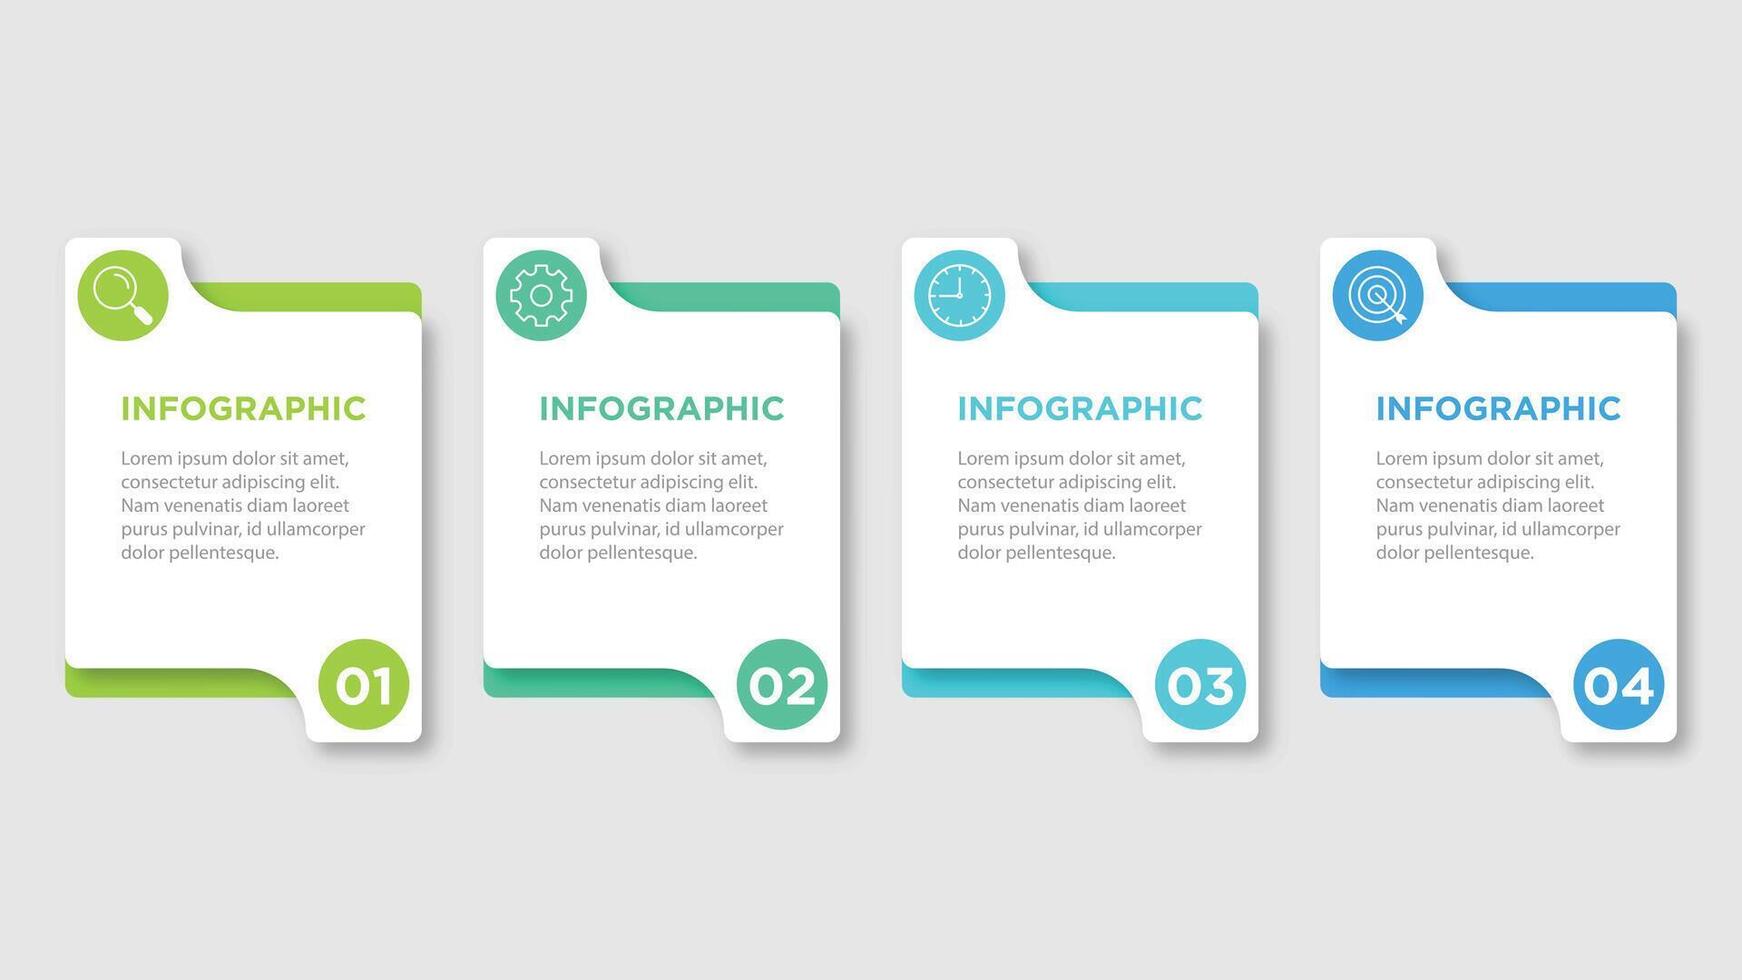 Infographic design business template with icons and 4 options or steps. vector